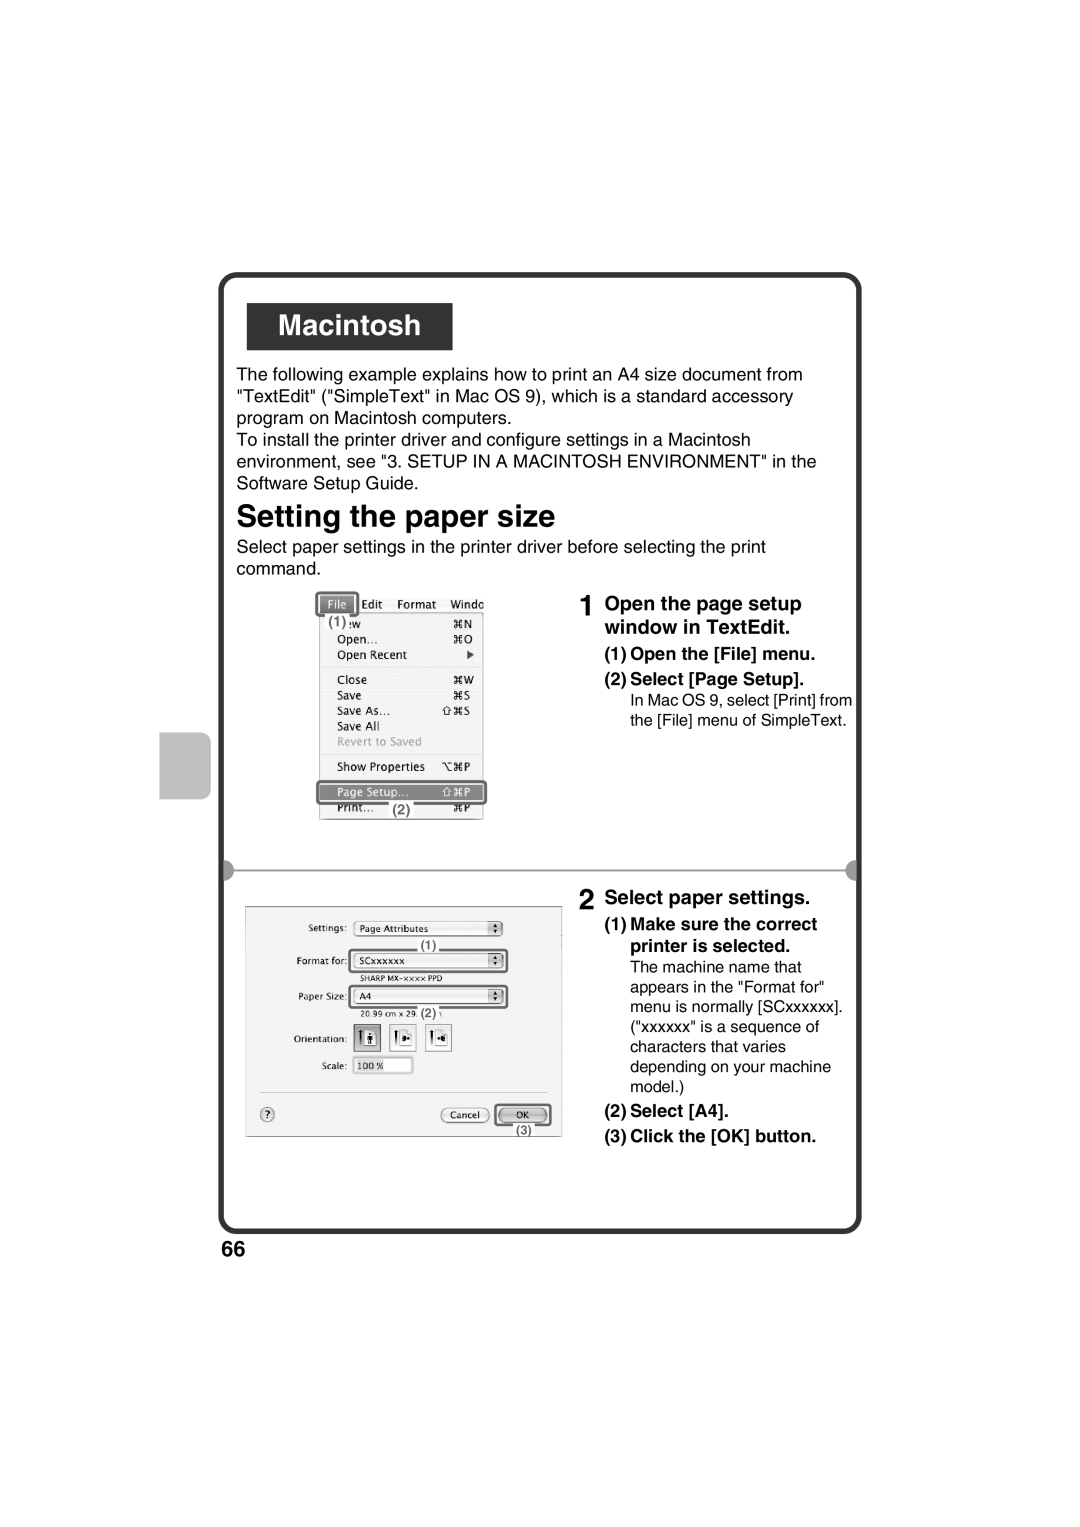 Sharp MX-C311 Setting the paper size, Macintosh, Open the page setup, window in TextEdit, Select paper settings, Select A4 